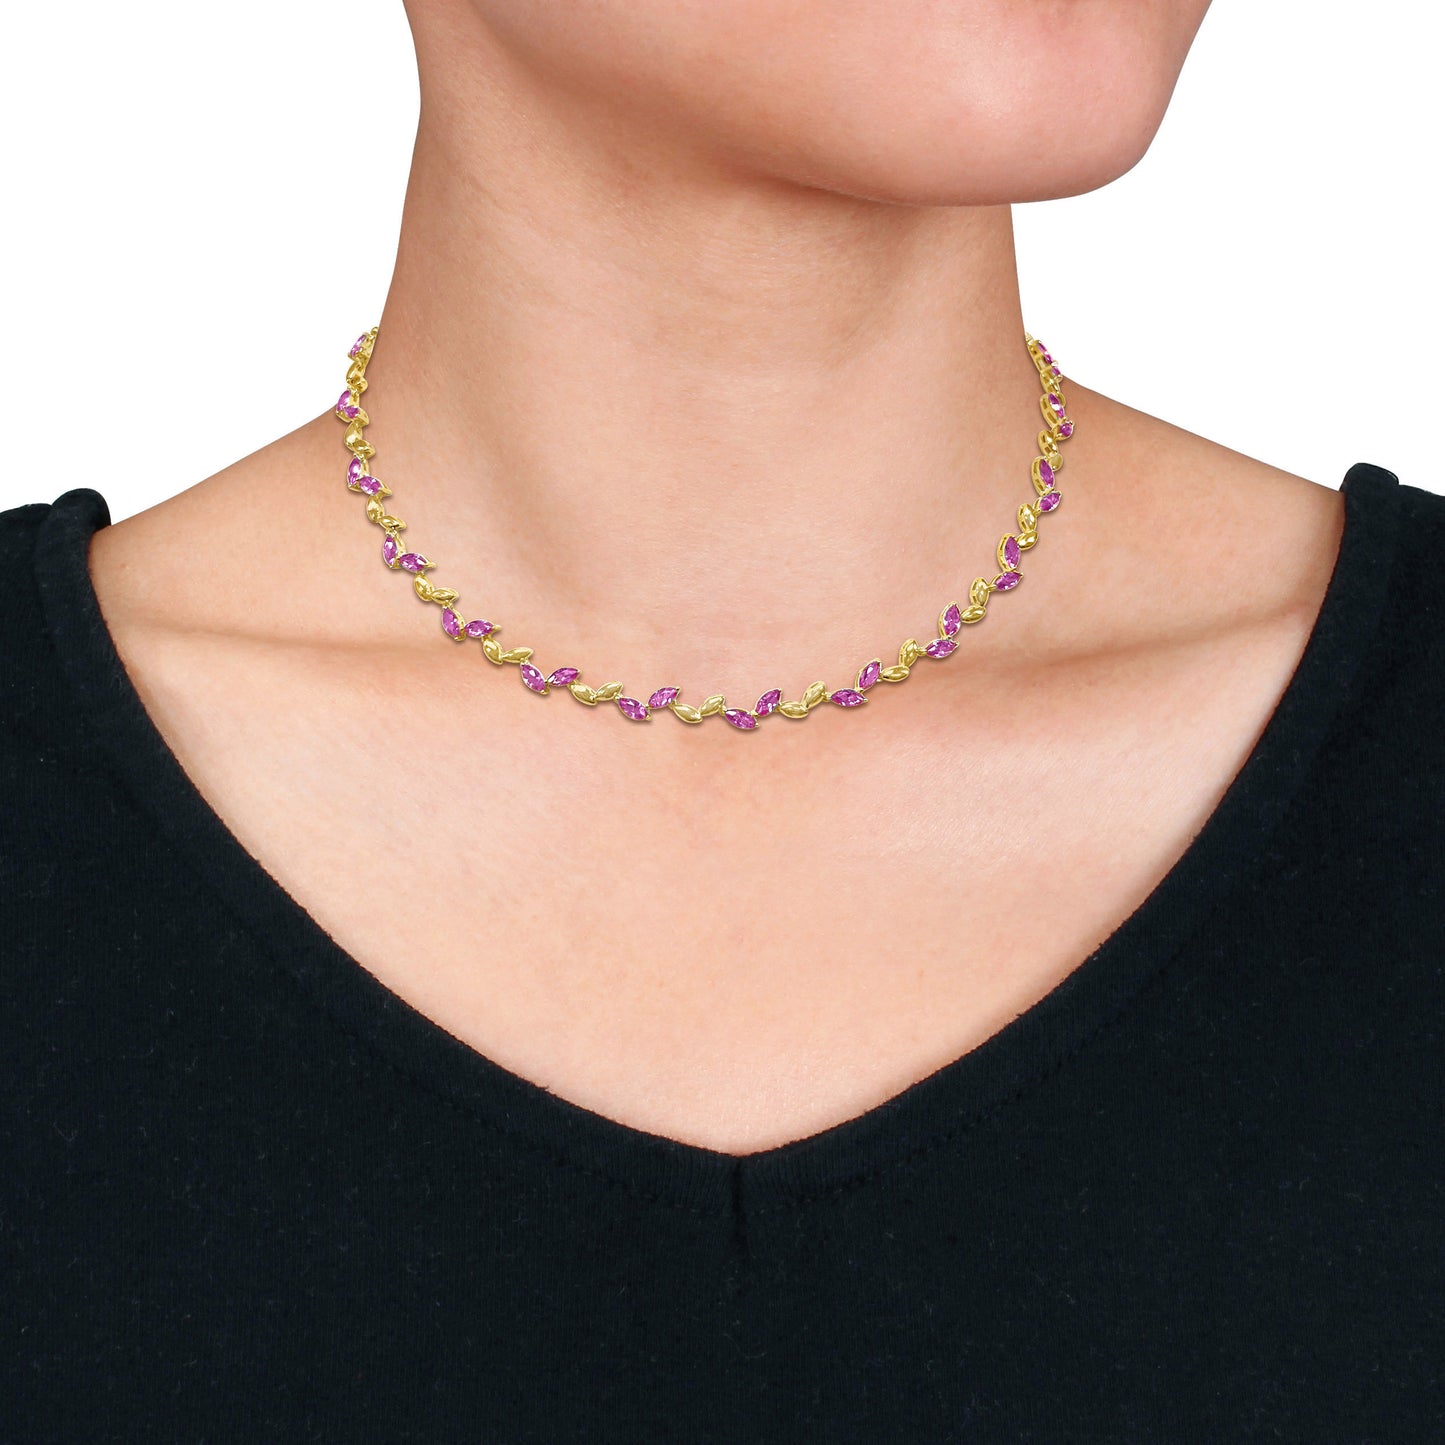 20 CT TGW Created Pink Sapphire Necklace Silver Yellow w/ Box Clasp Length (inches): 17